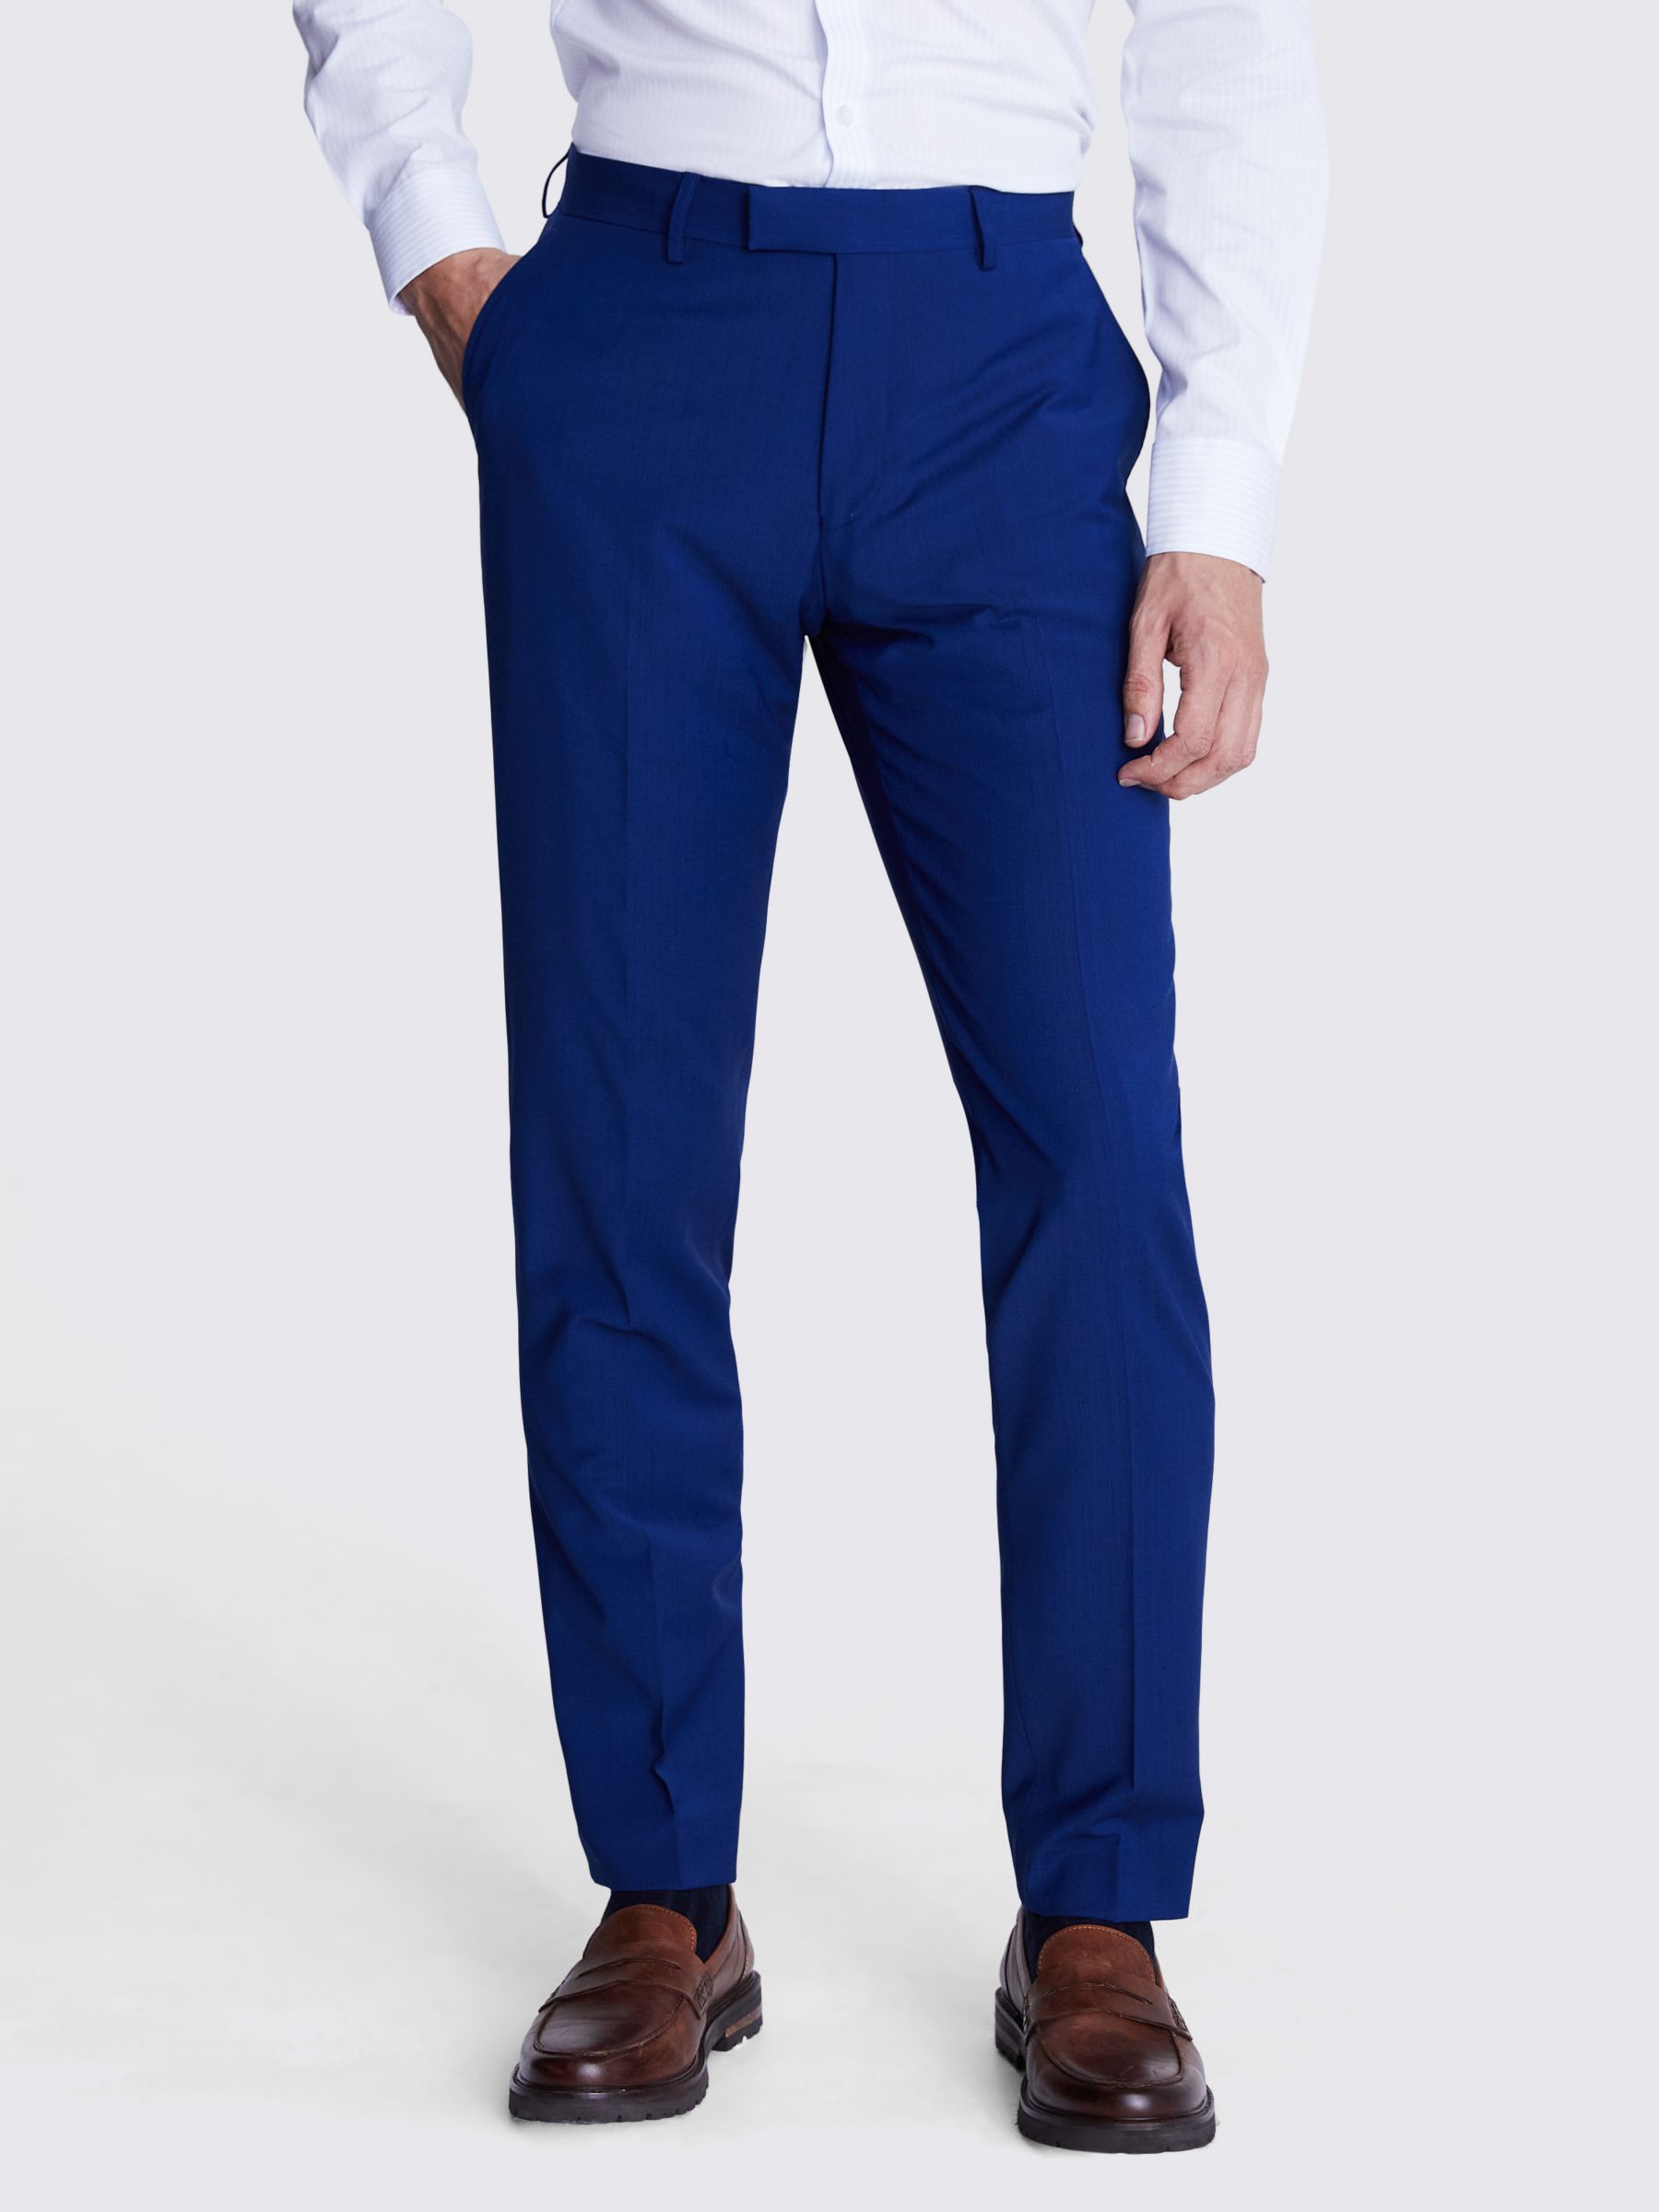 Moss Tailored Fit Wool Blend Suit Trousers, Royal Blue, 42R